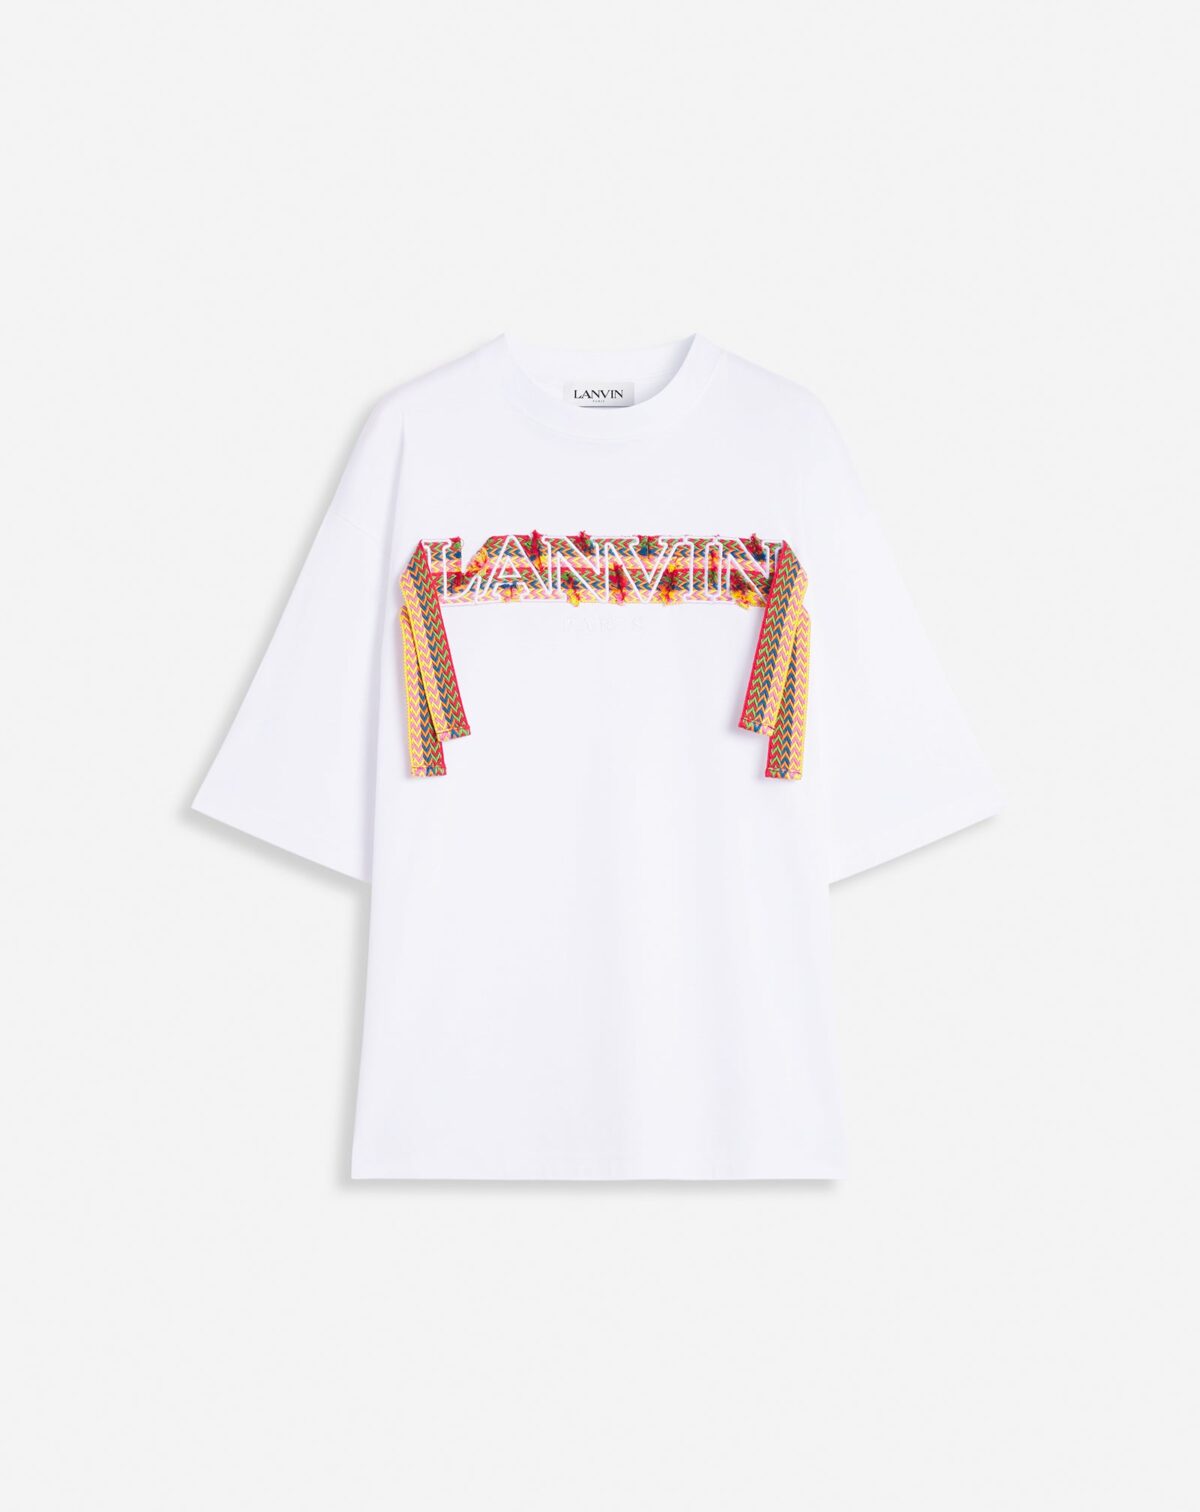 CURB LANVIN EMBROIDERED OVERSIZED T-SHIRT WHITE